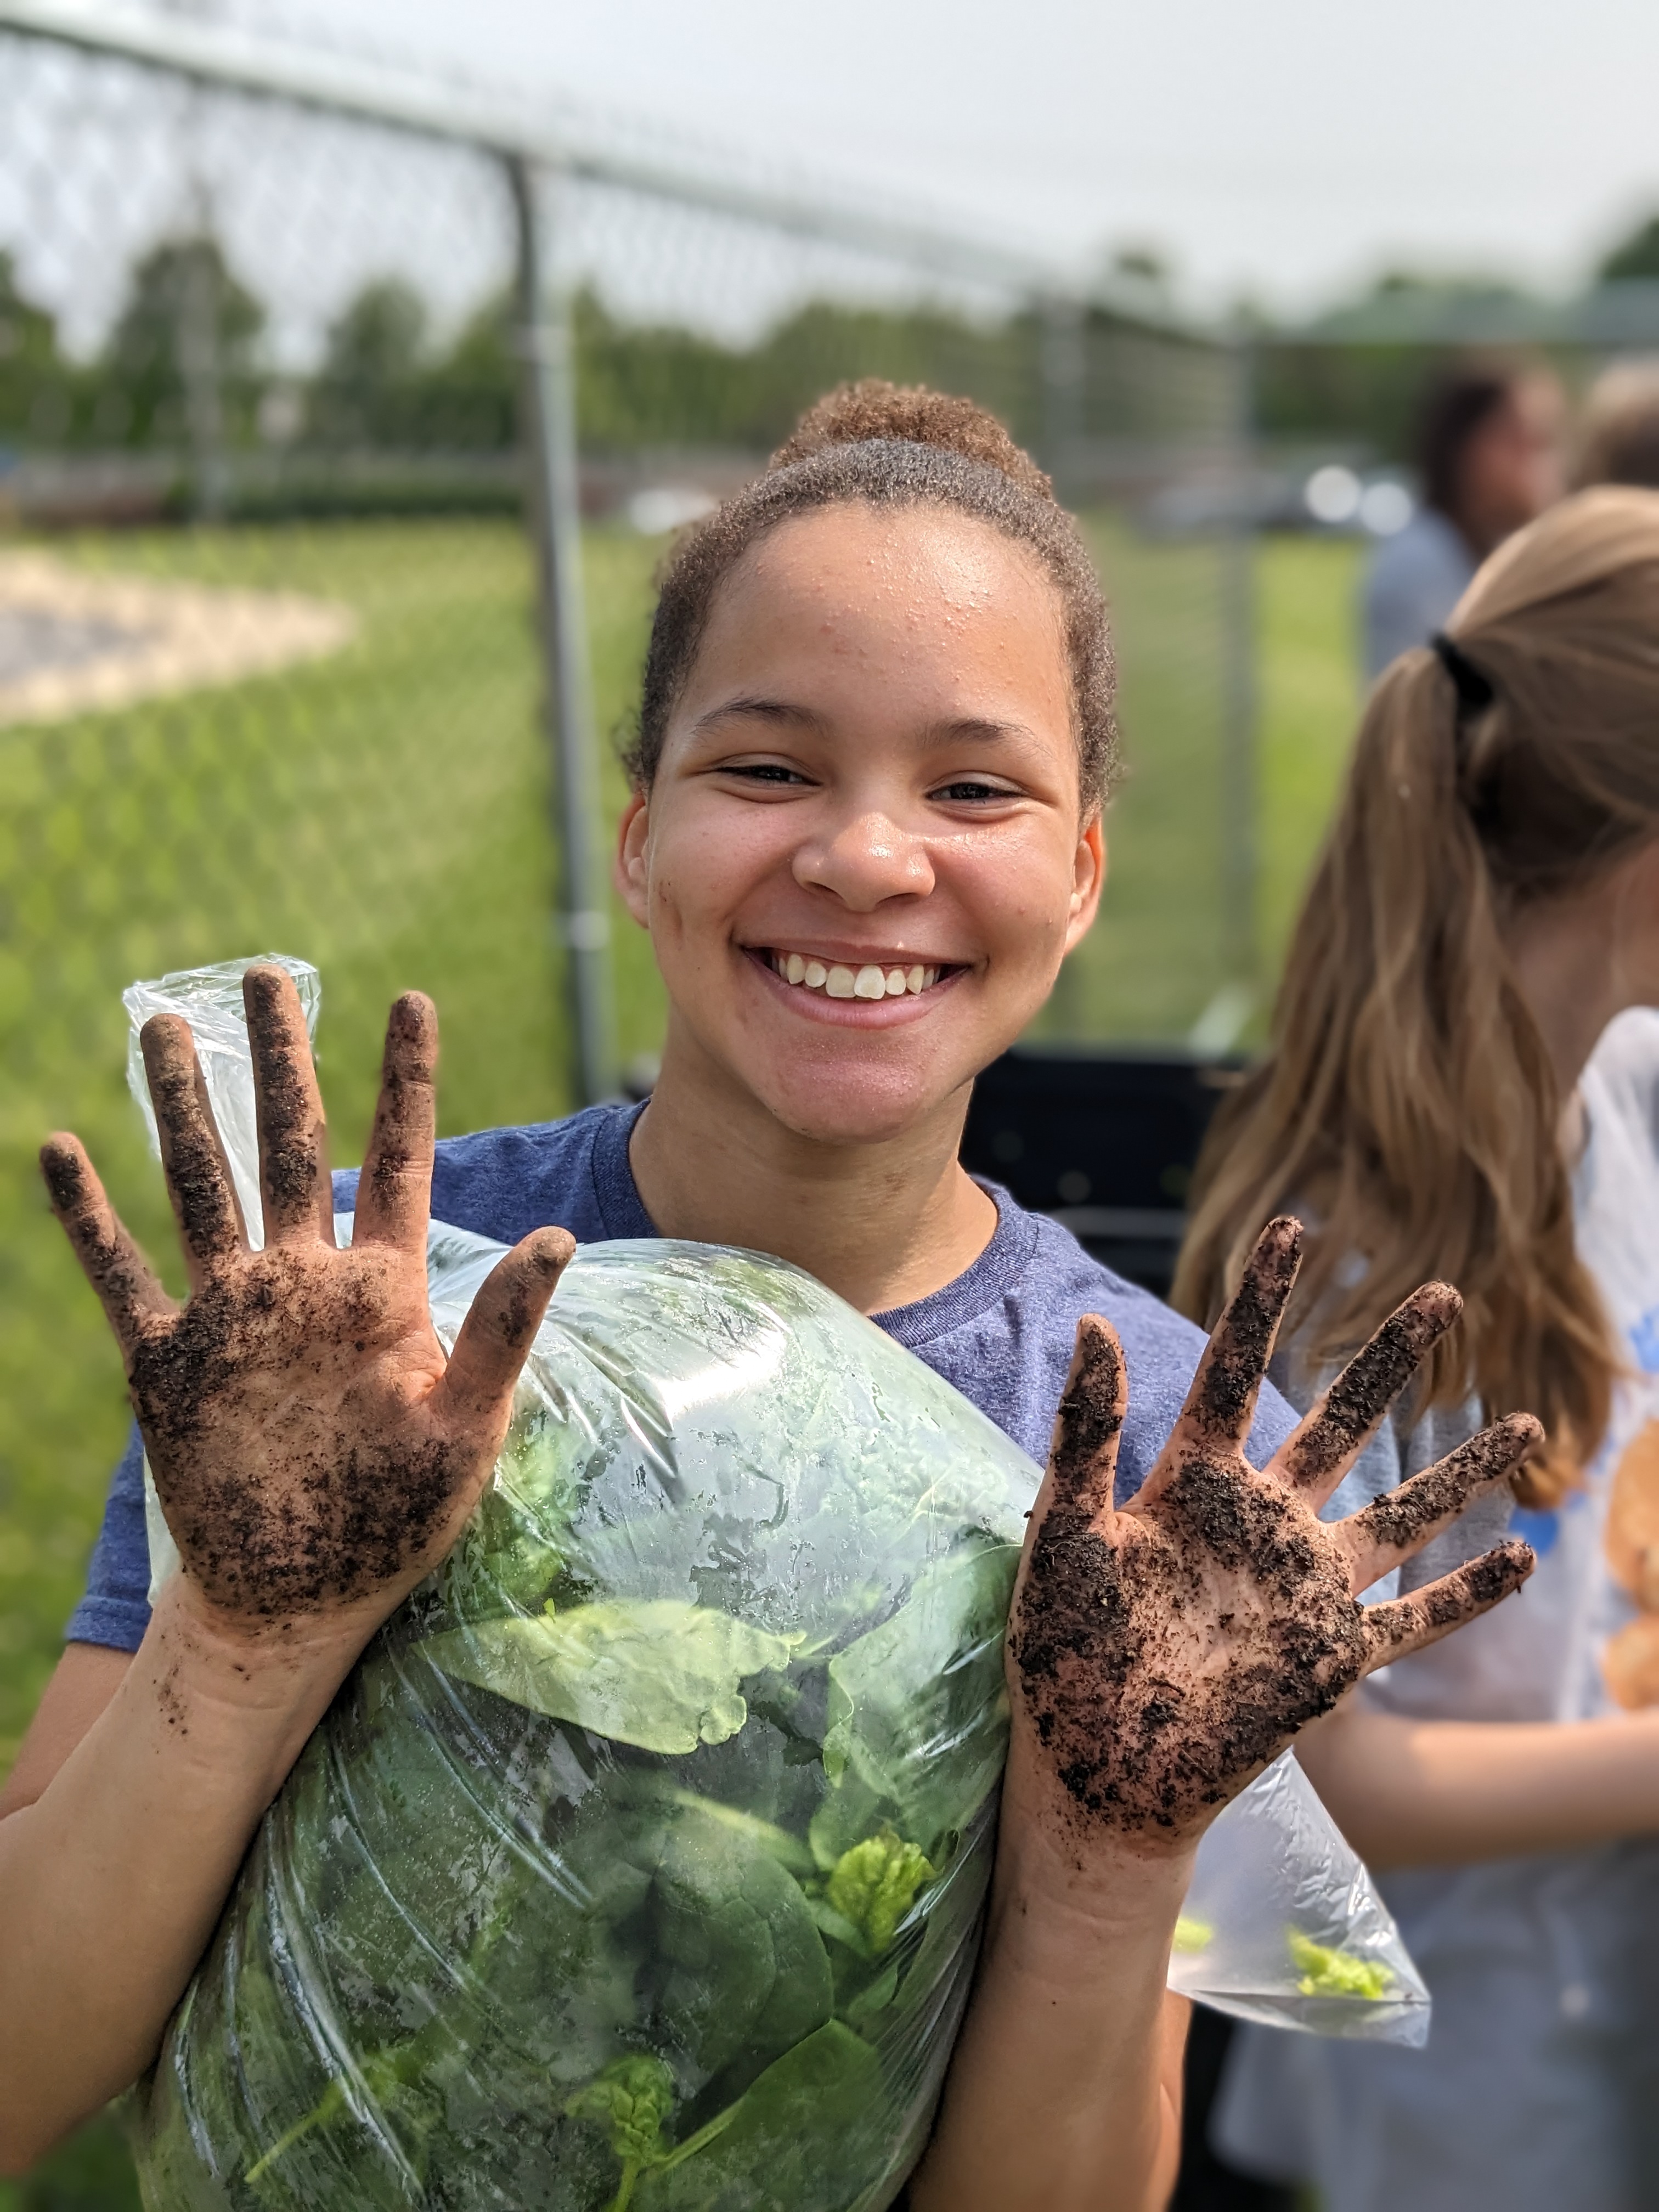 a child holding a bag of vegetables showing their hands covered with dirt to the camera